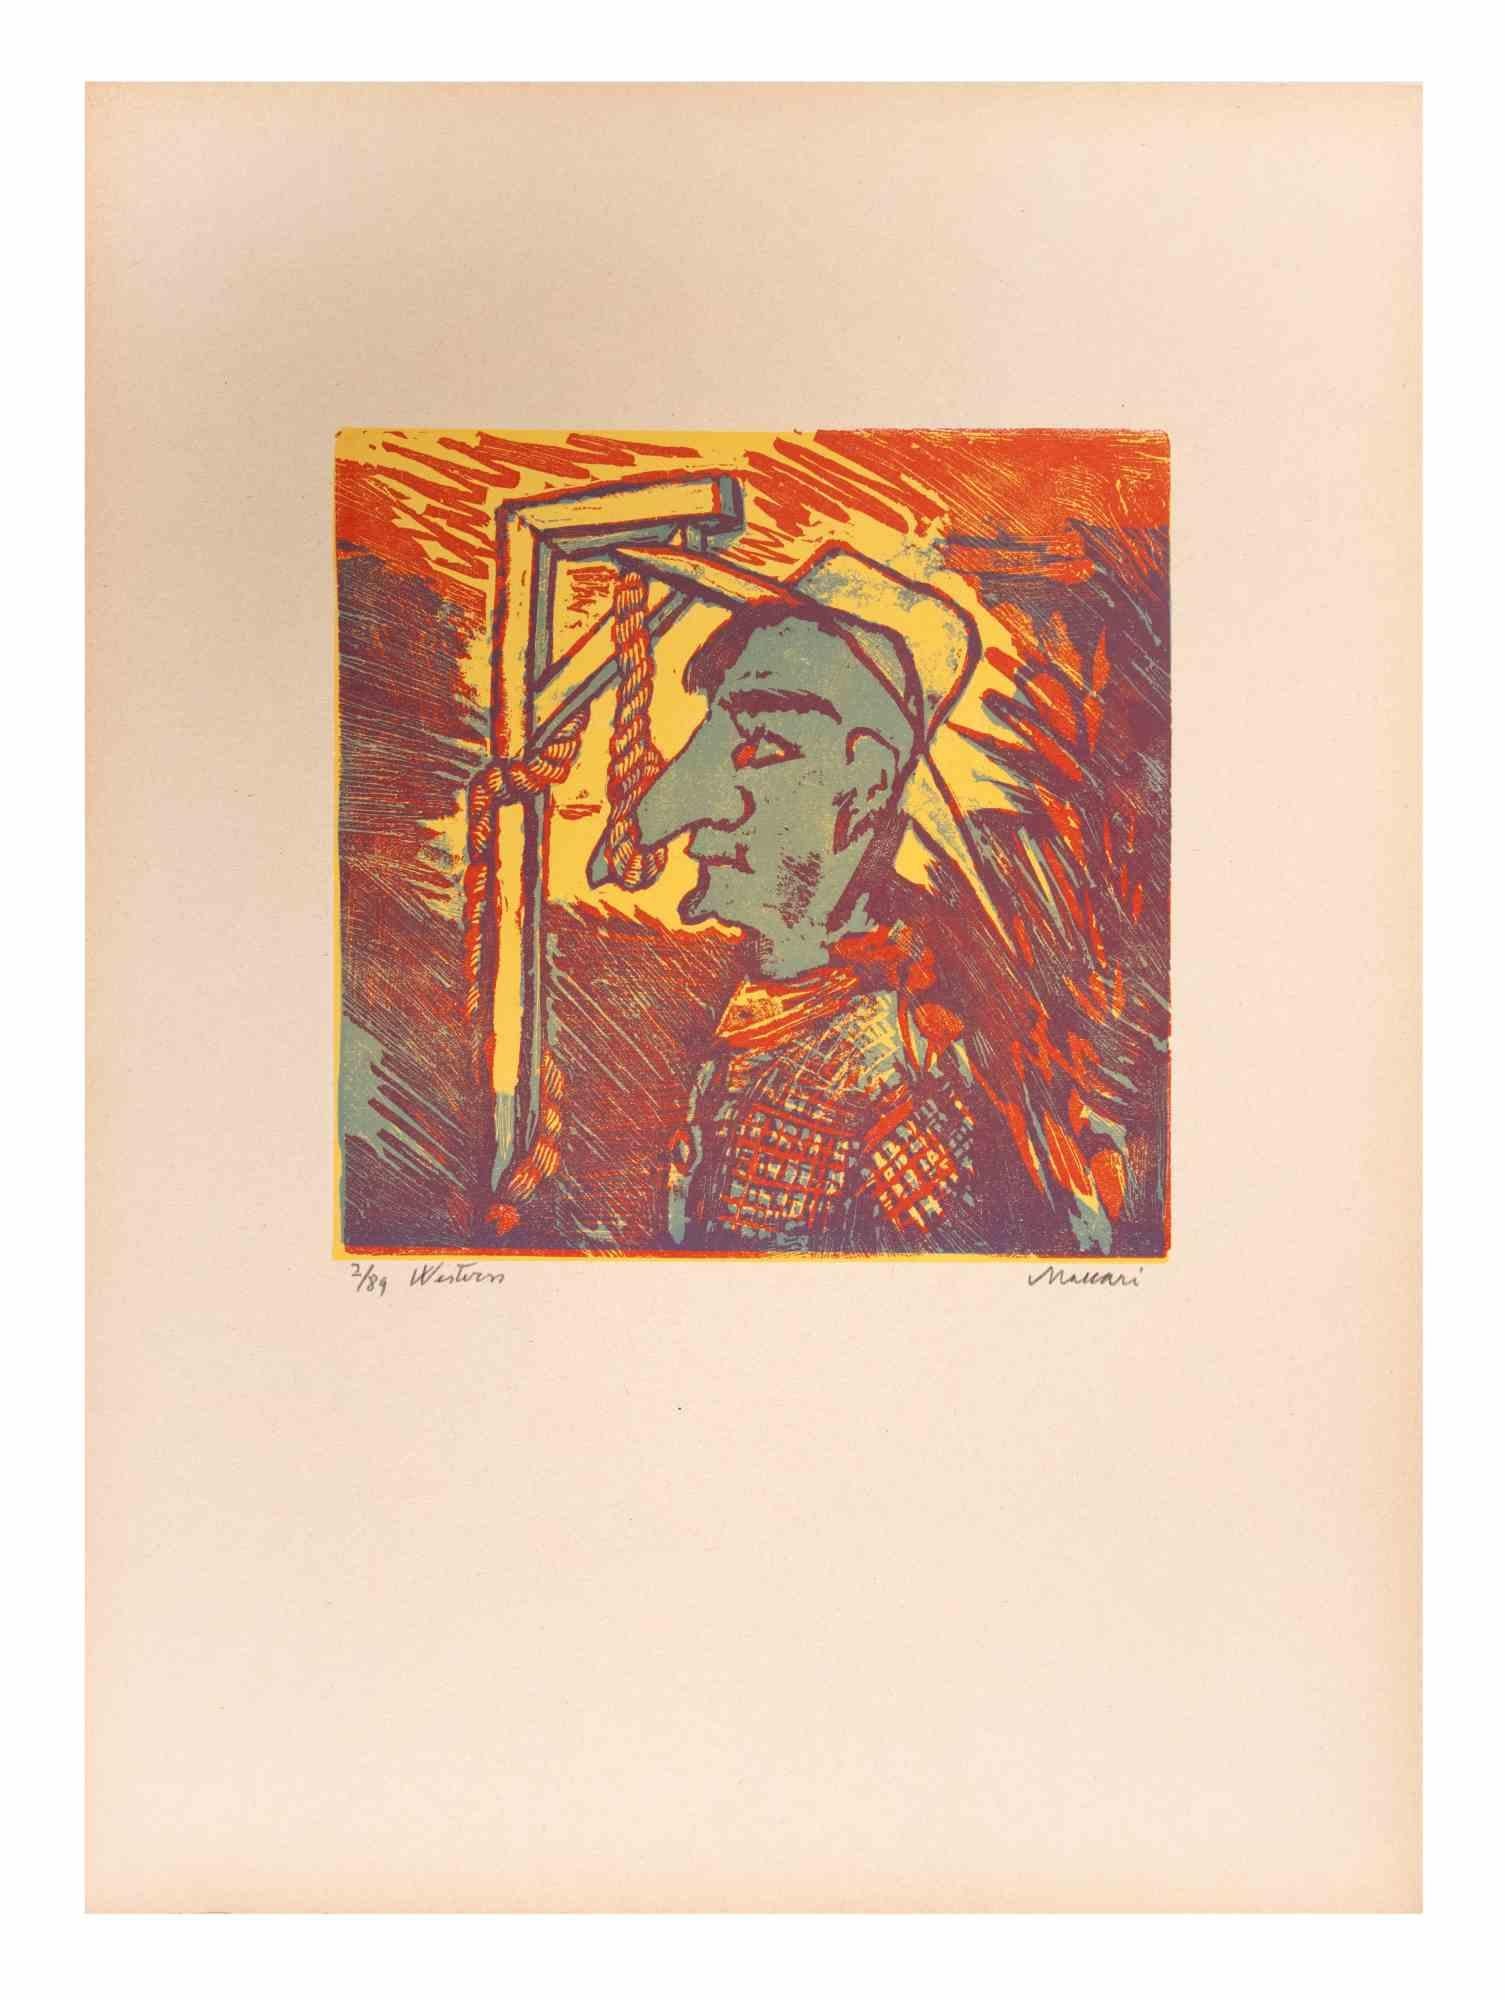 Western is an Artwork realized by Mino Maccari  (1924-1989) in the Mid-20th Century.

Colored woodcut on paper. Hand-signed on the lower, numbered 2/89 specimens and titled on the left margin.

Good conditions.

Mino Maccari (Siena, 1924-Rome, June